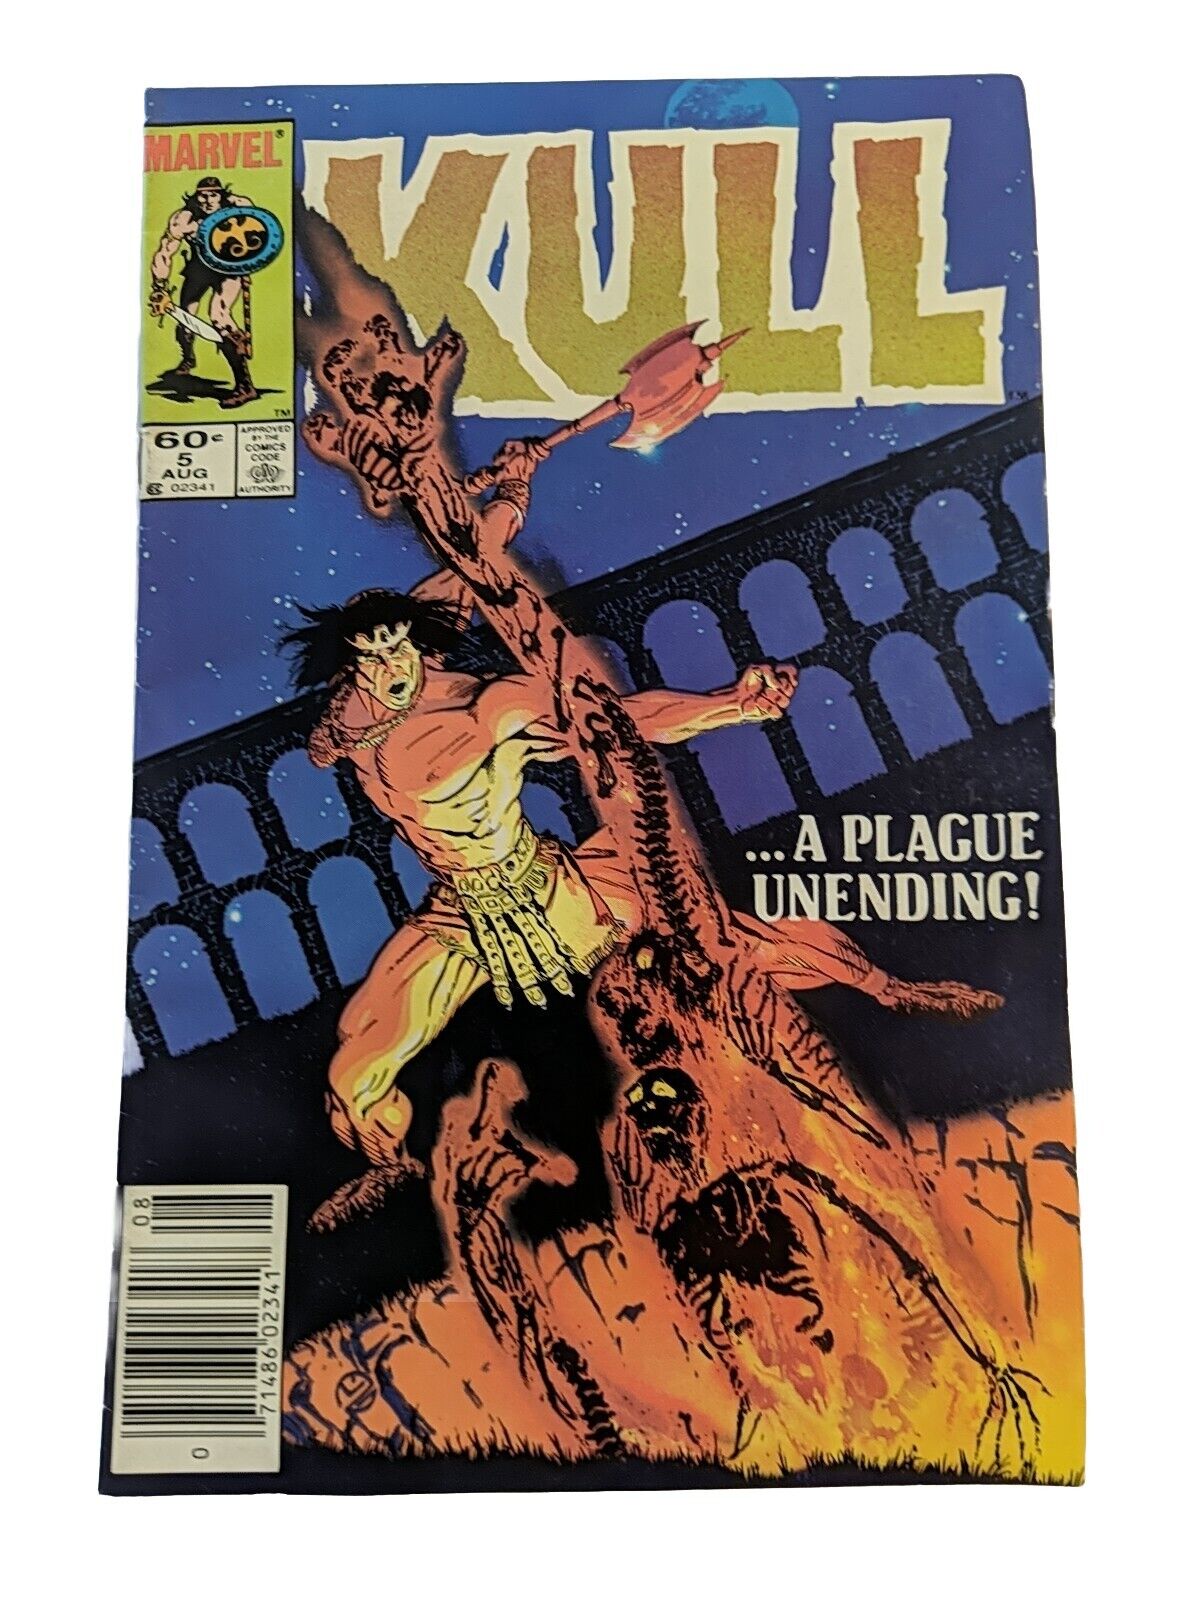 Kull the Conqueror 3rd Series #5 Newsstand August 